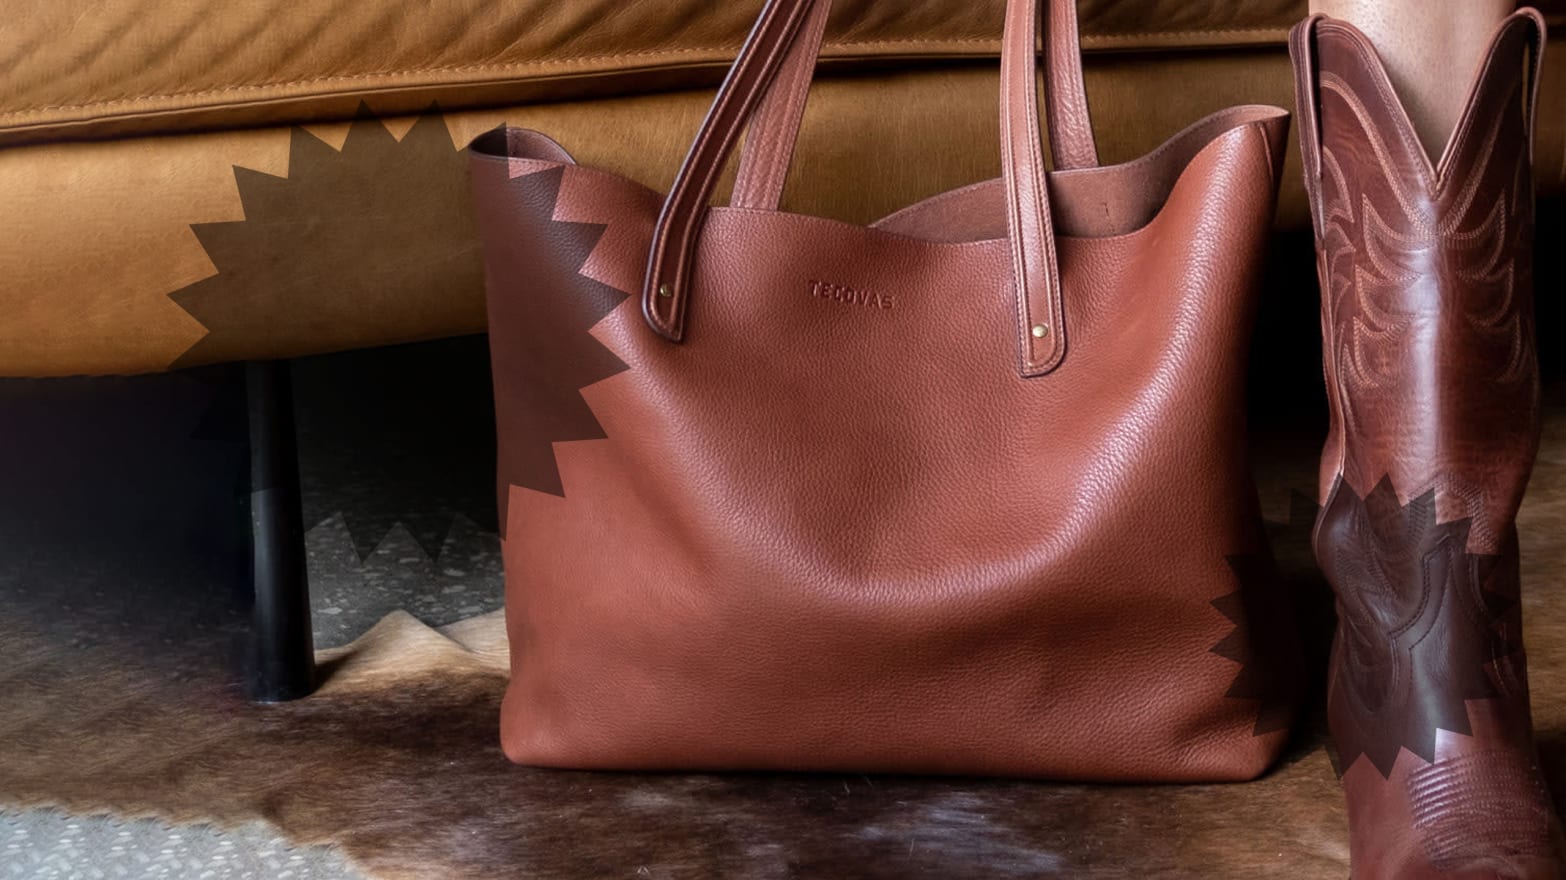 Tecovas Leather Tote Bag Review 2023